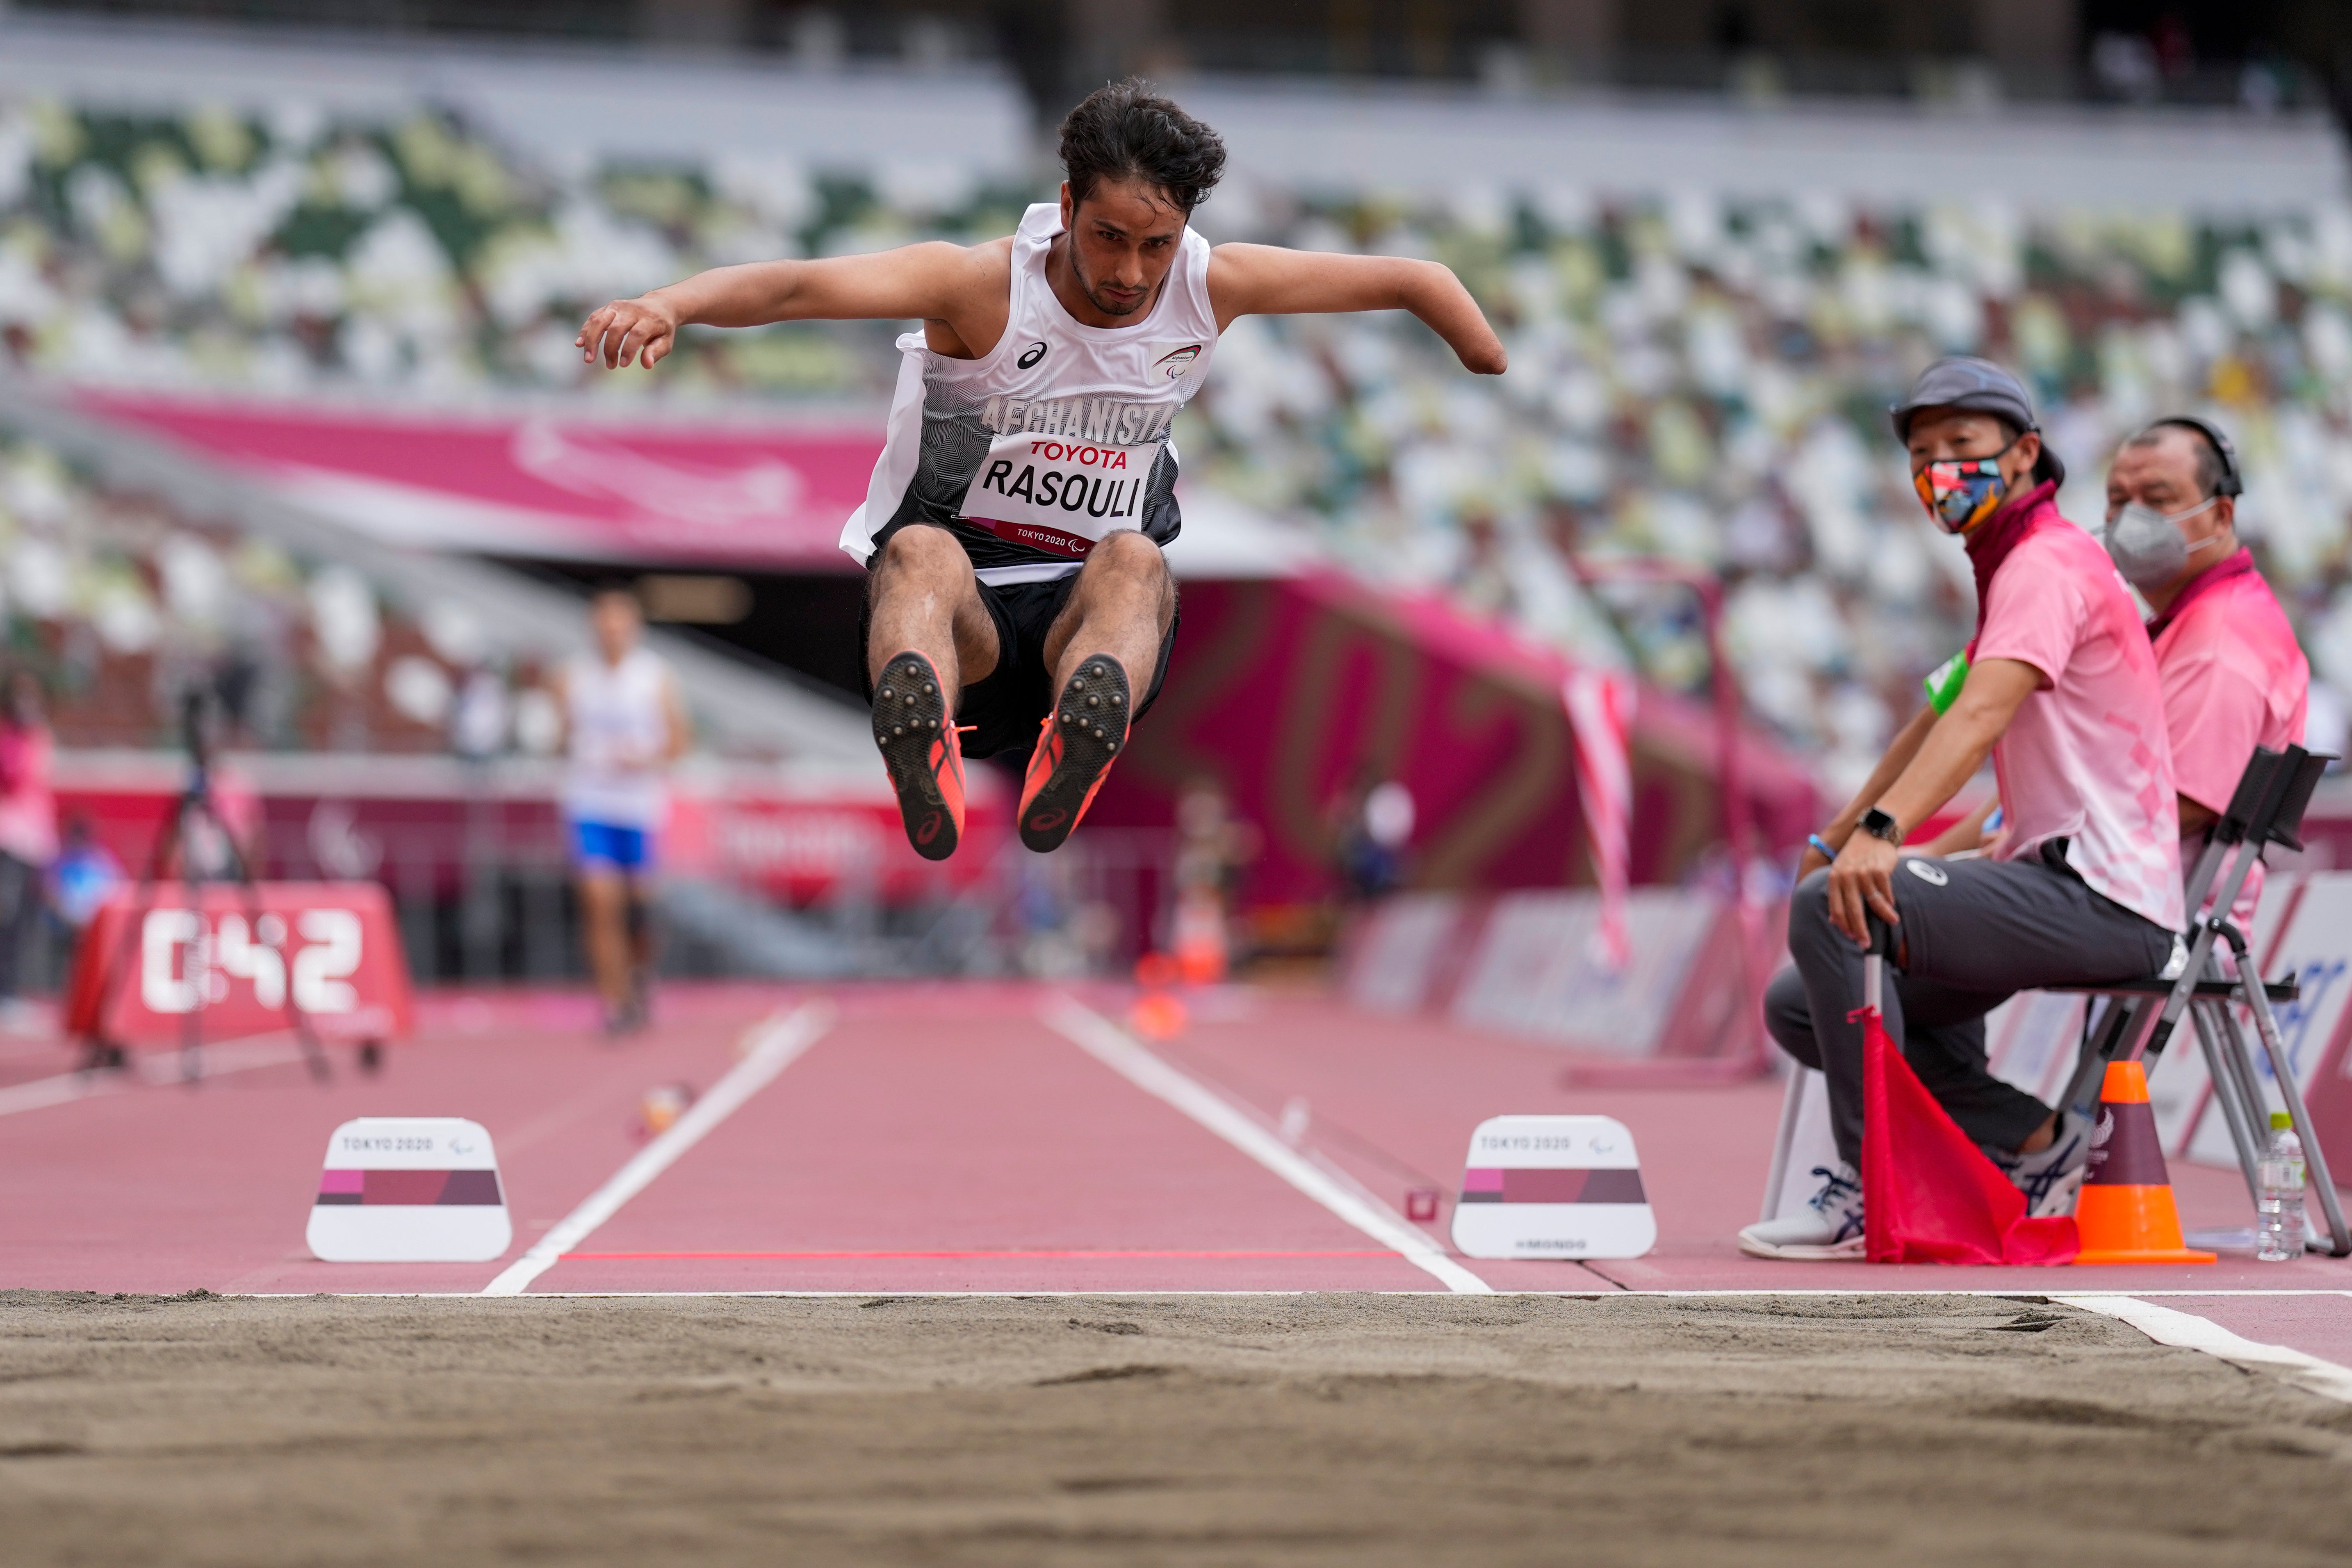 Afghanistan's Hossain Rasouli competes in the men's T47 long jump